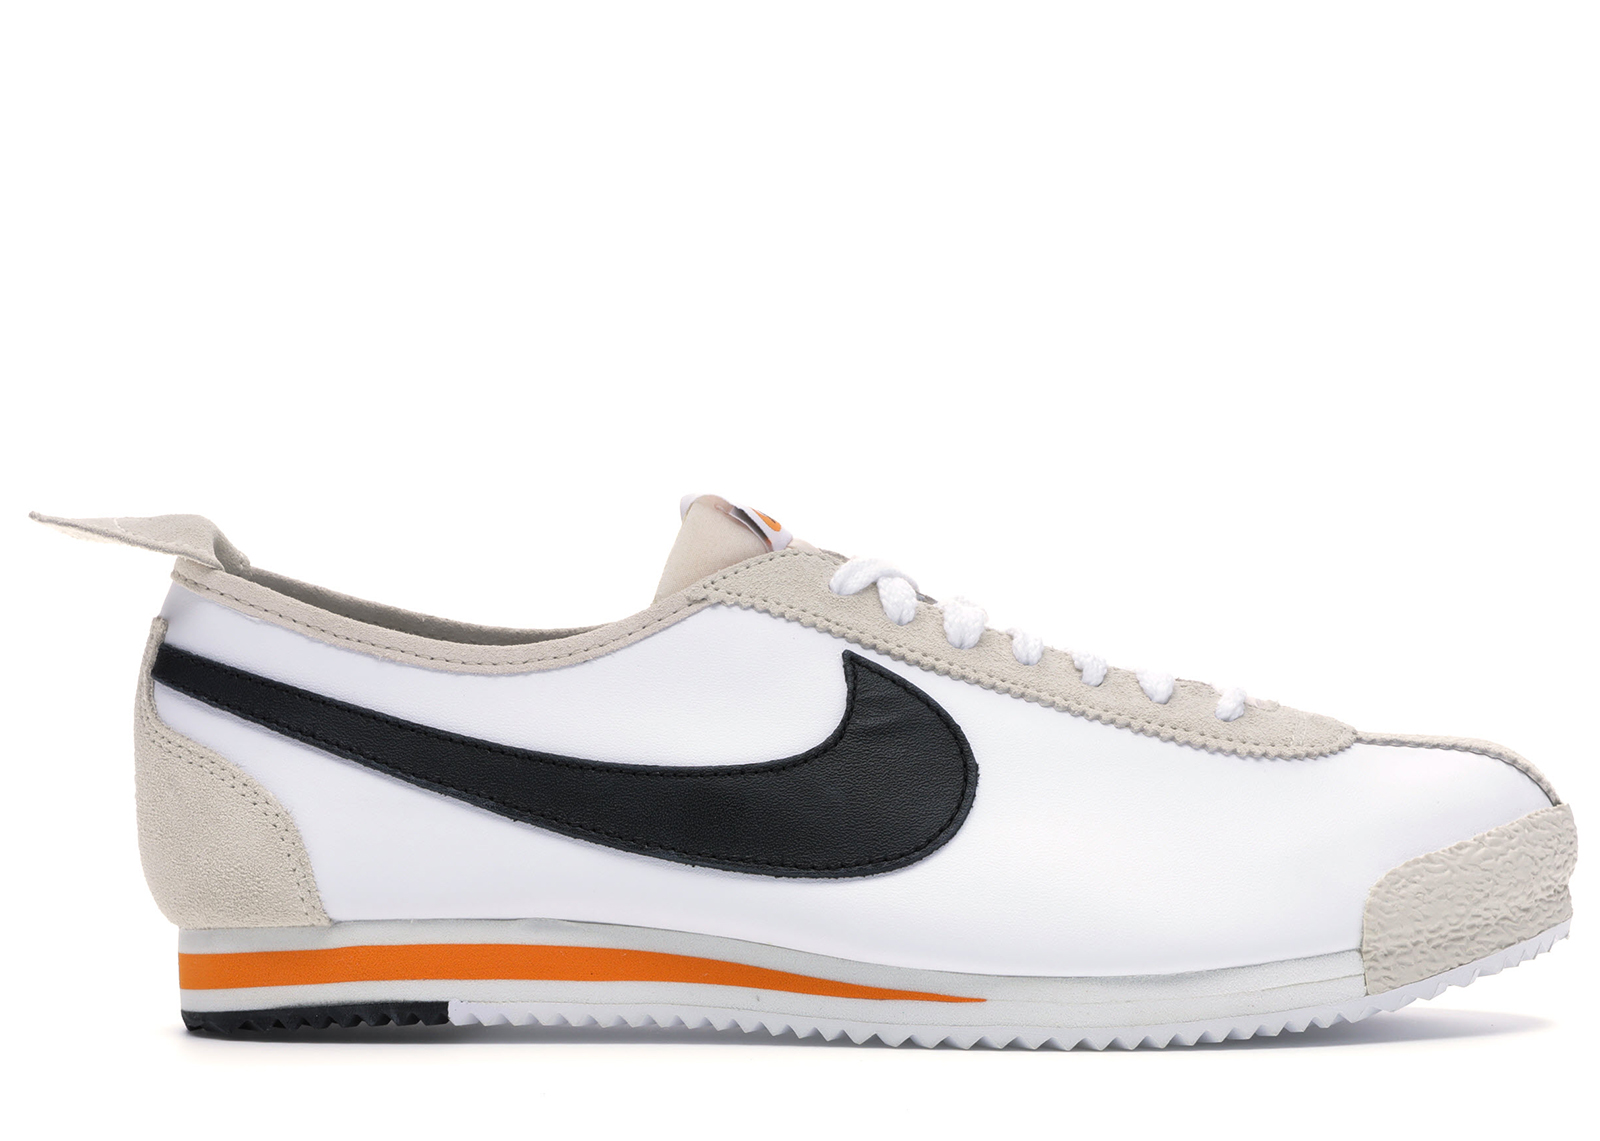 Buy Nike Cortez Shoes & Deadstock Sneakers اسعار دانكن دونتس